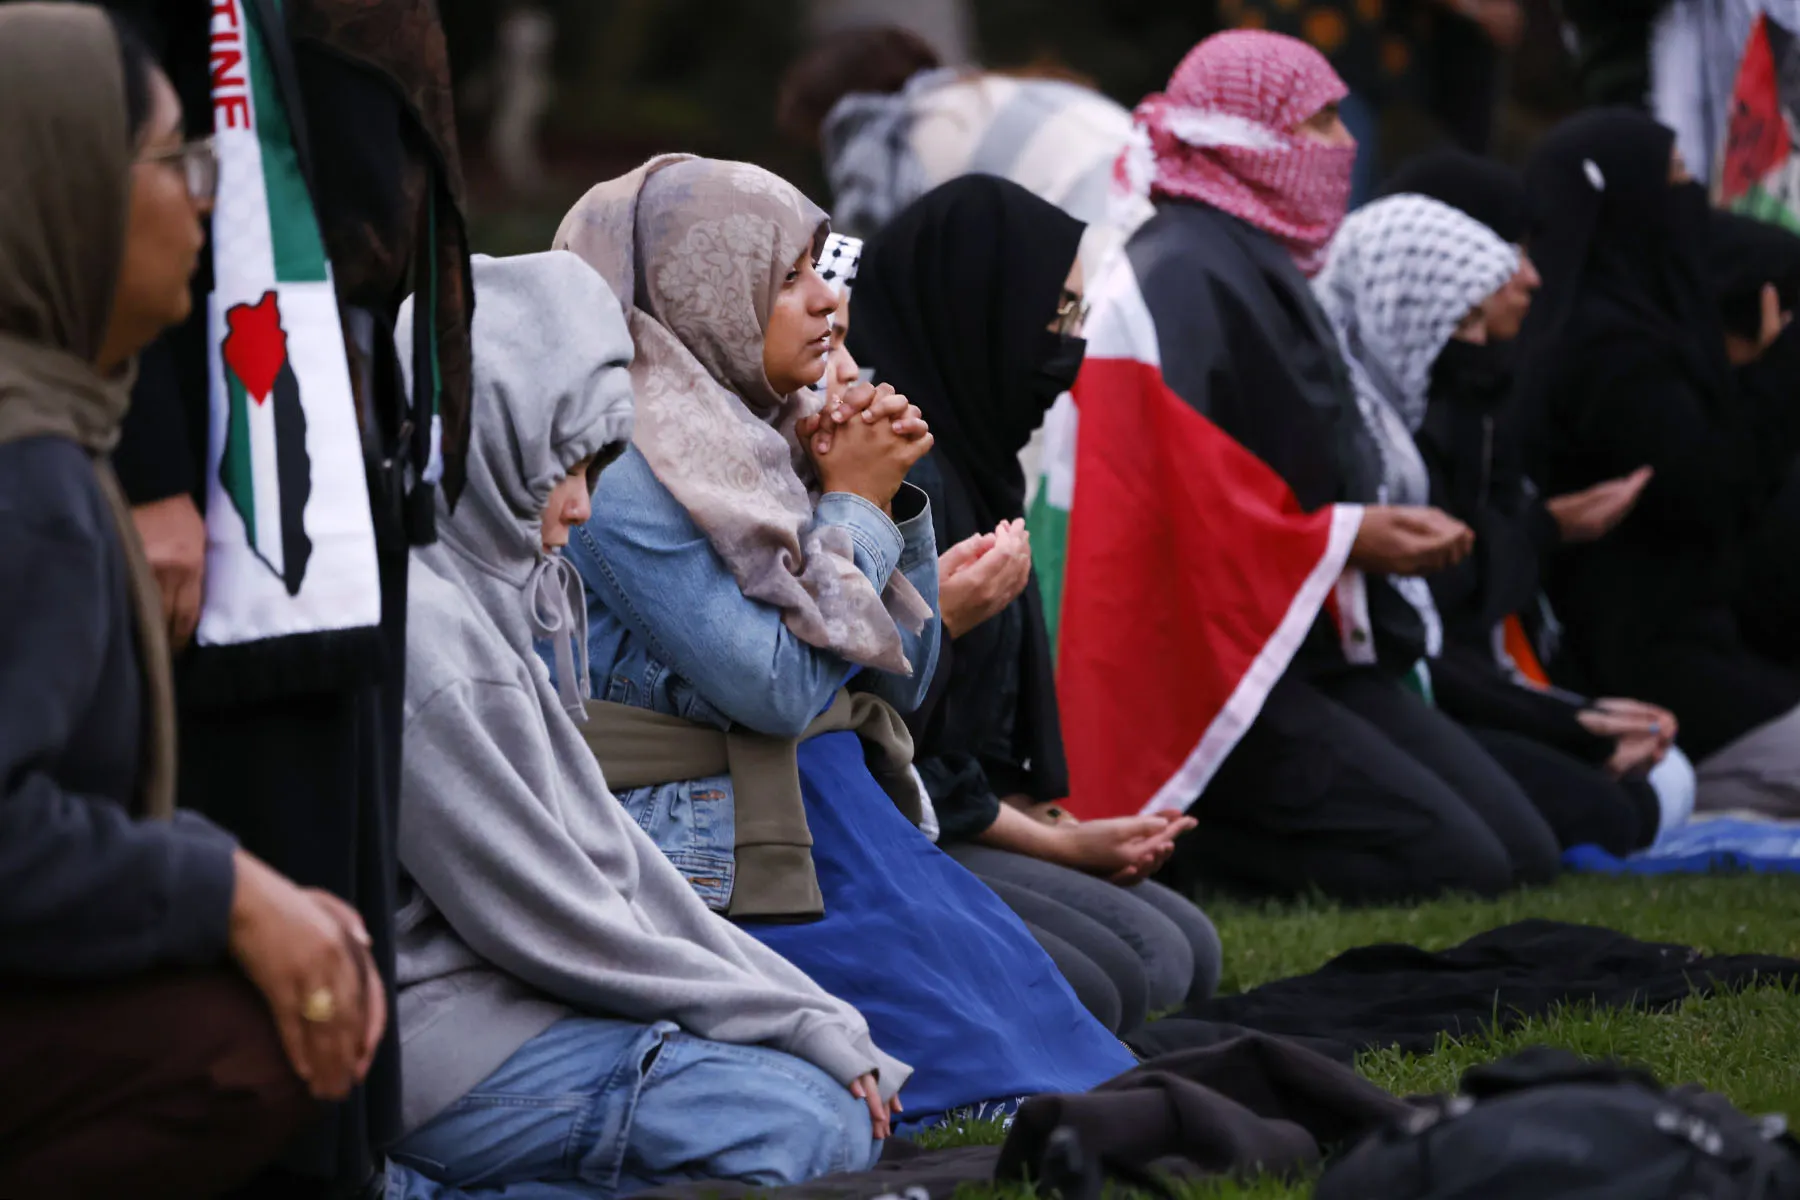 Protesters wearing hijabs and Palestinian flags pray at a park in Los Angeles during a protest.